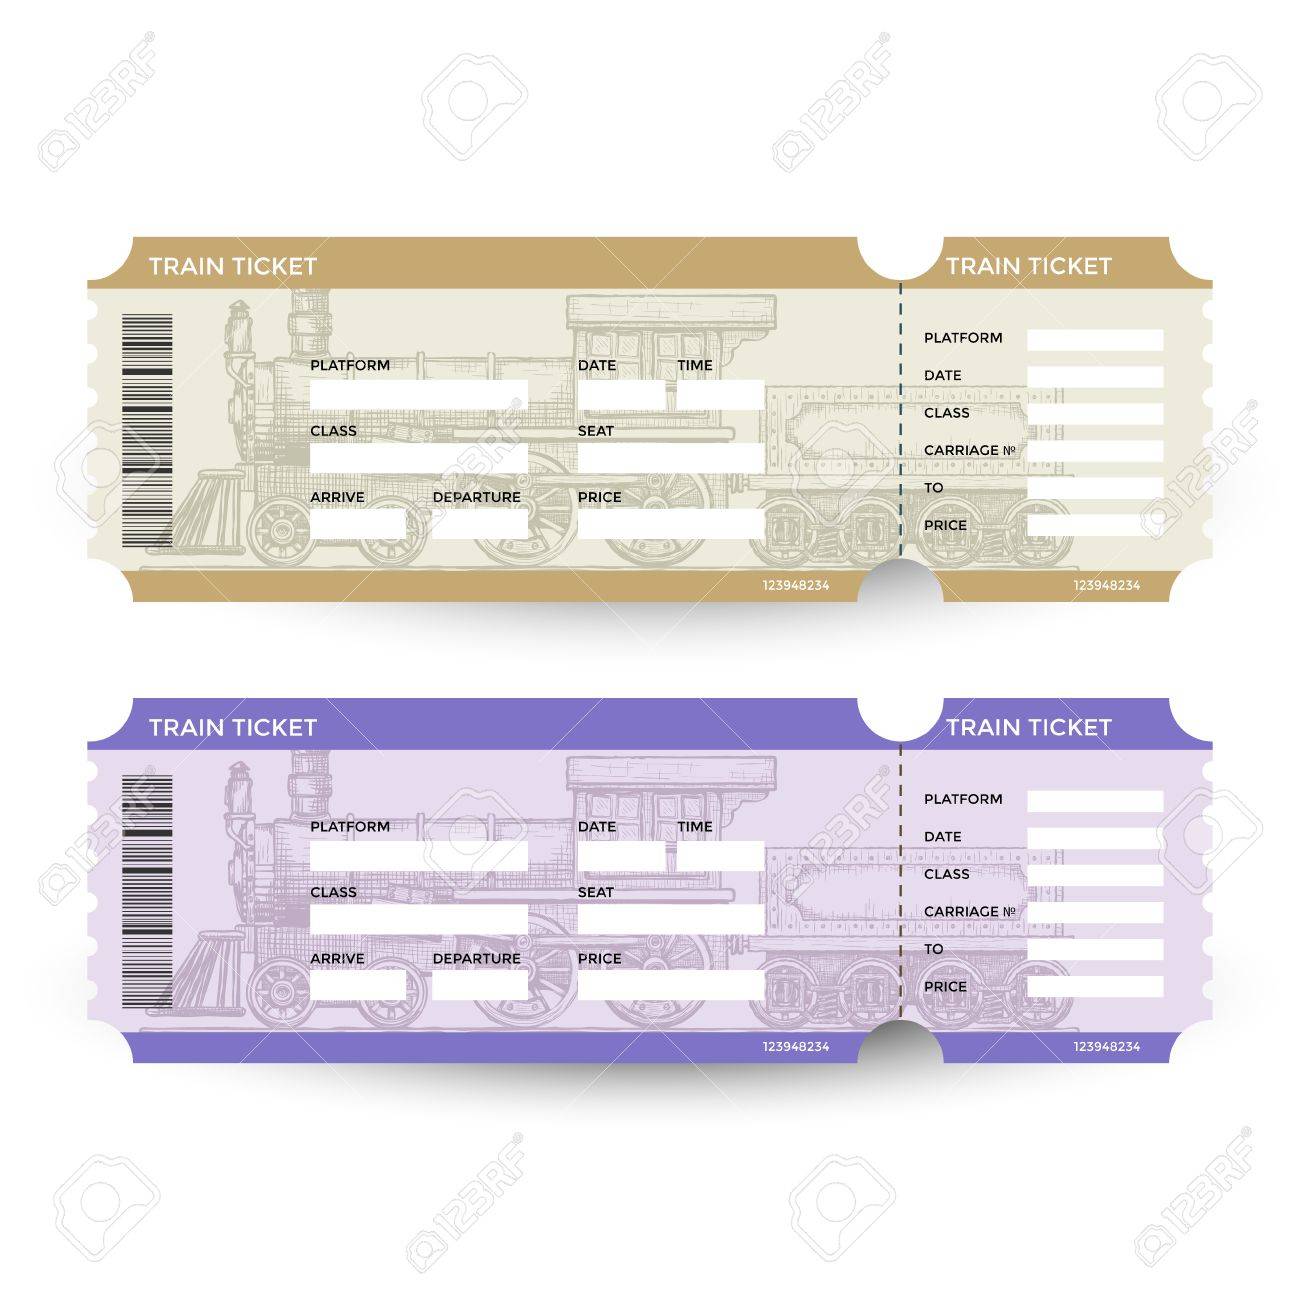 0301 train tickets travel concept isolated on white vector illustration